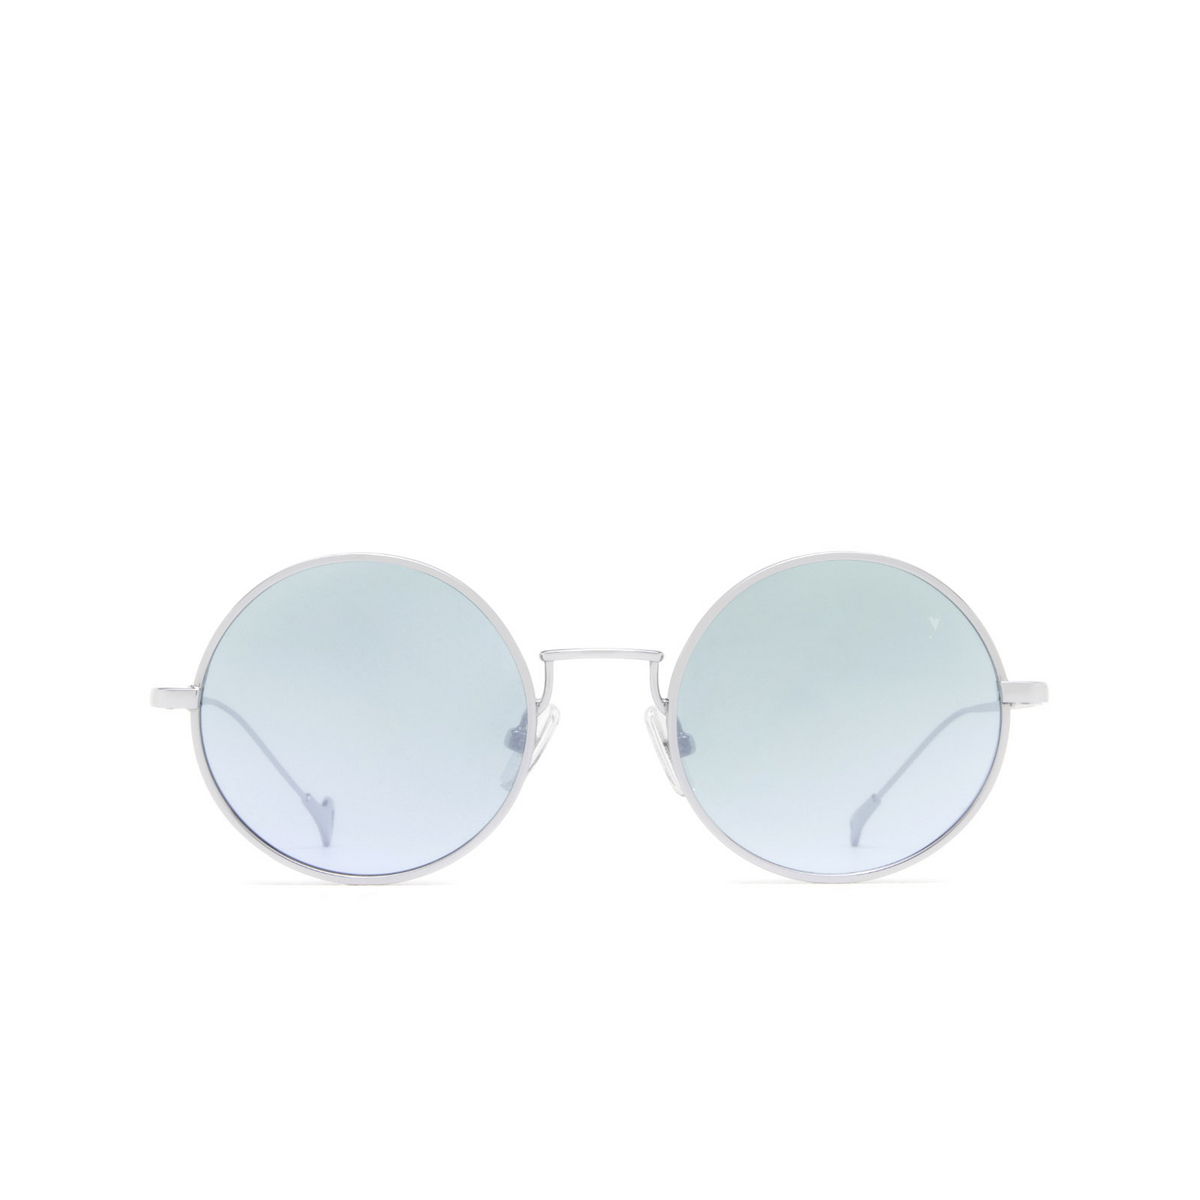 Eyepetizer® Round Sunglasses: William color Silver C.1-43F - front view.